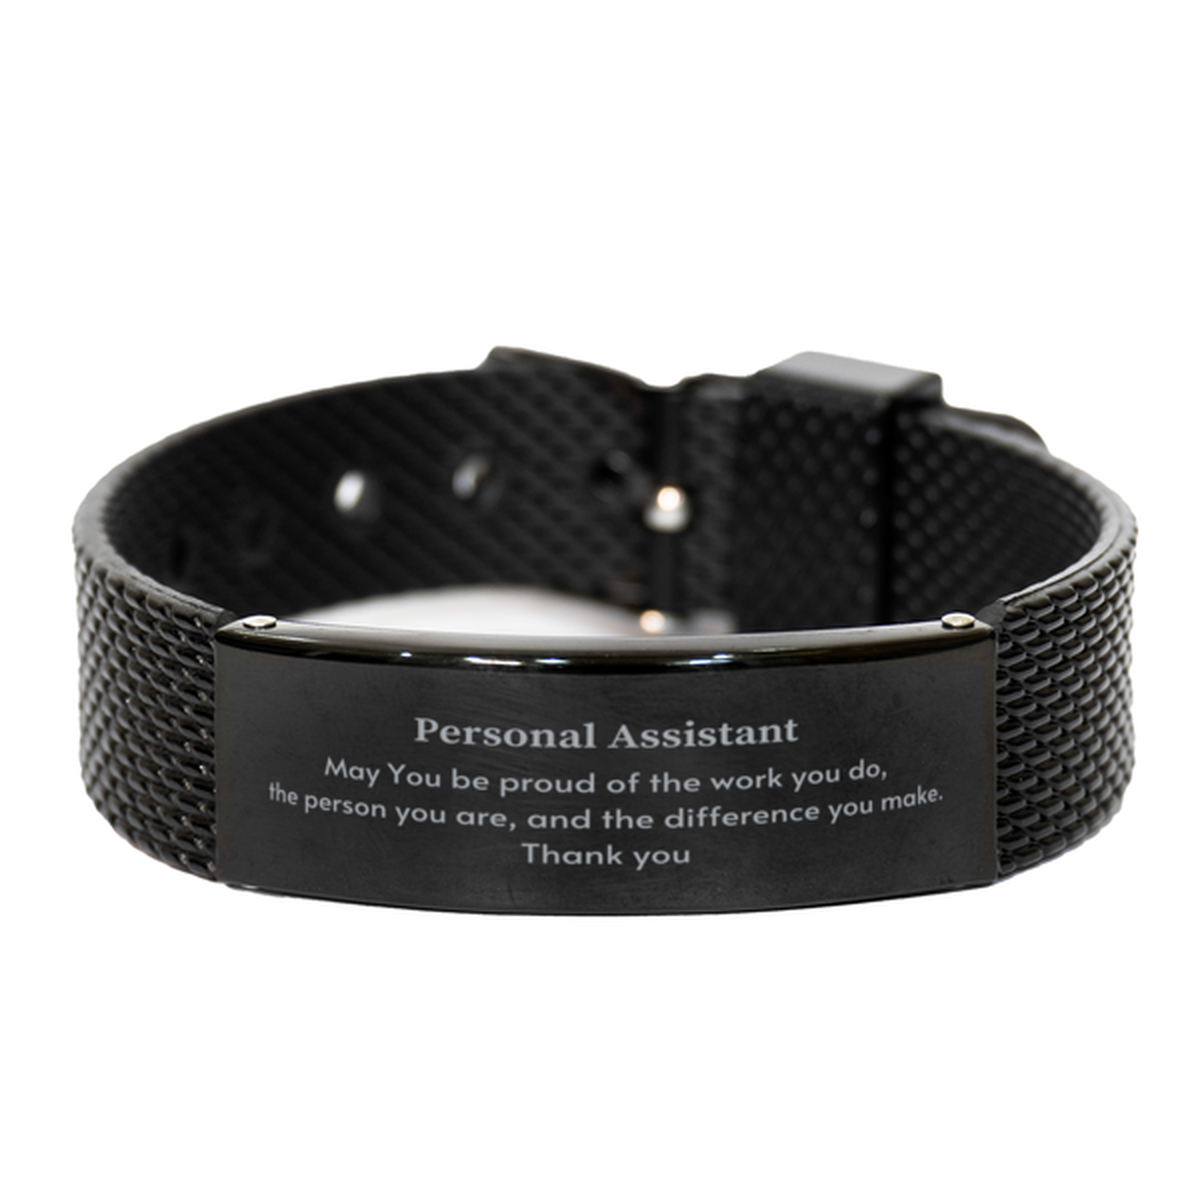 Heartwarming Black Shark Mesh Bracelet Retirement Coworkers Gifts for Personal Assistant, Personal Assistant May You be proud of the work you do, the person you are Gifts for Boss Men Women Friends